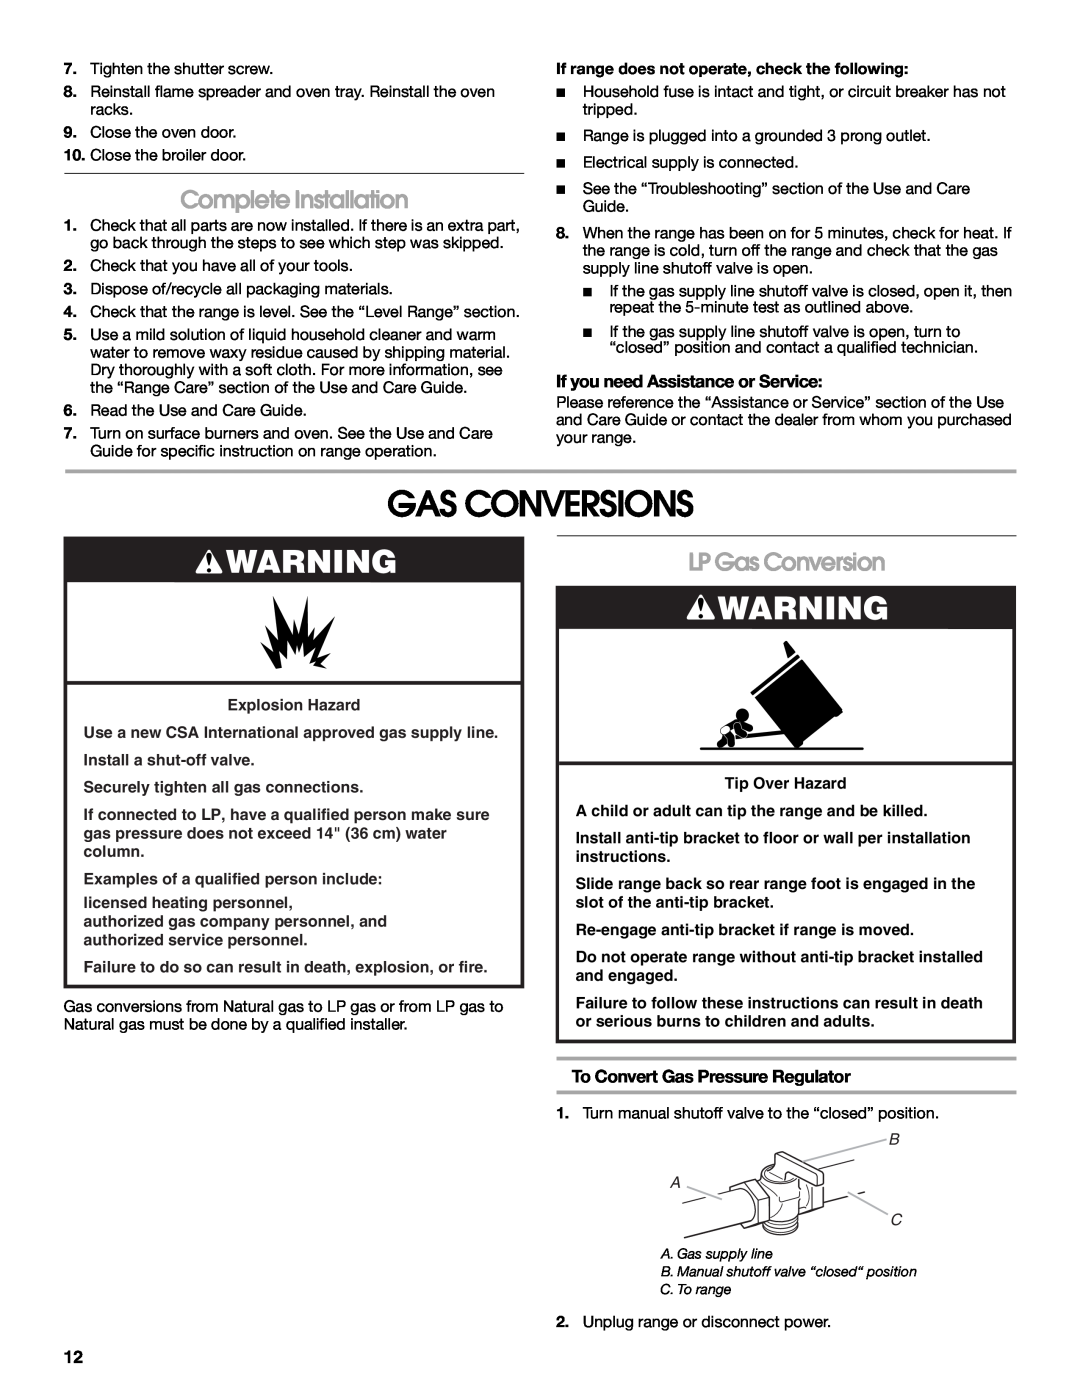 Whirlpool W10459123B Gas Conversions, Complete Installation, LP Gas Conversion, If you need Assistance or Service, B A C 